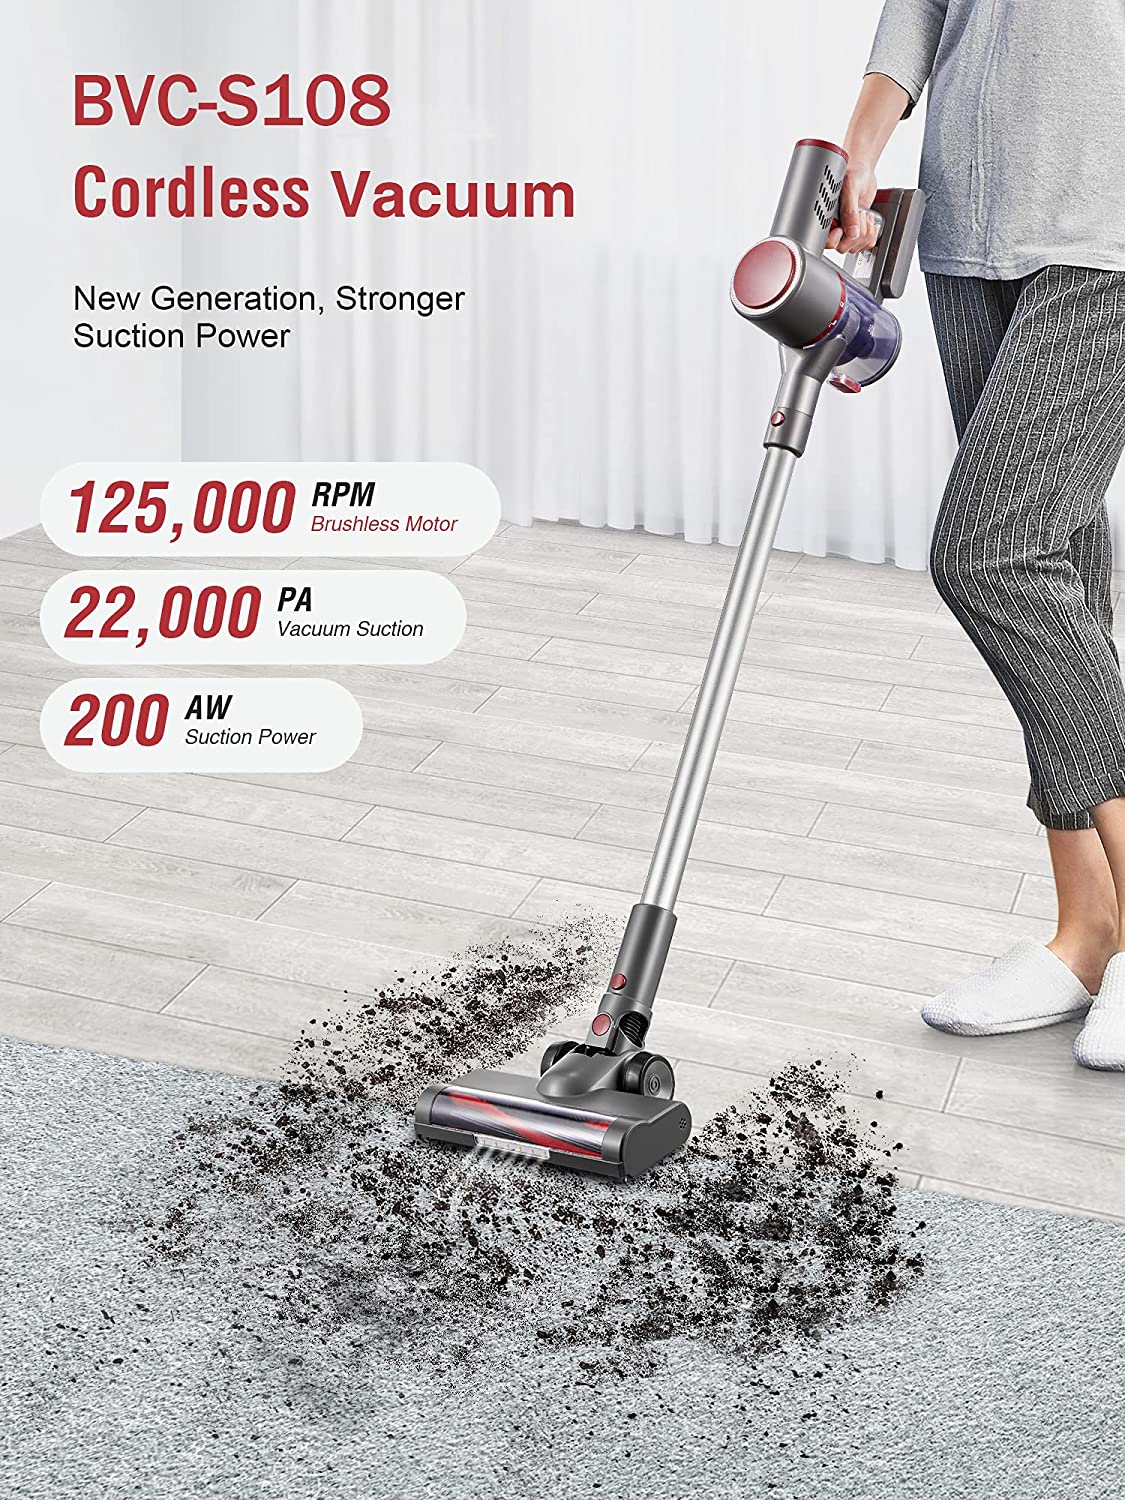 Kealive Battery Vacuum Cleaner, Cordless Vacuum Cleaner with 22000 Pa Strong Suction Power, 6 in 1 Vacuum Cleaner, Cordless Vacuum Cleaner, 40 Minutes Running Time, 2 Adjustable Suction Levels for Carpets, Wooden Floors, Pet Hair, Carpets